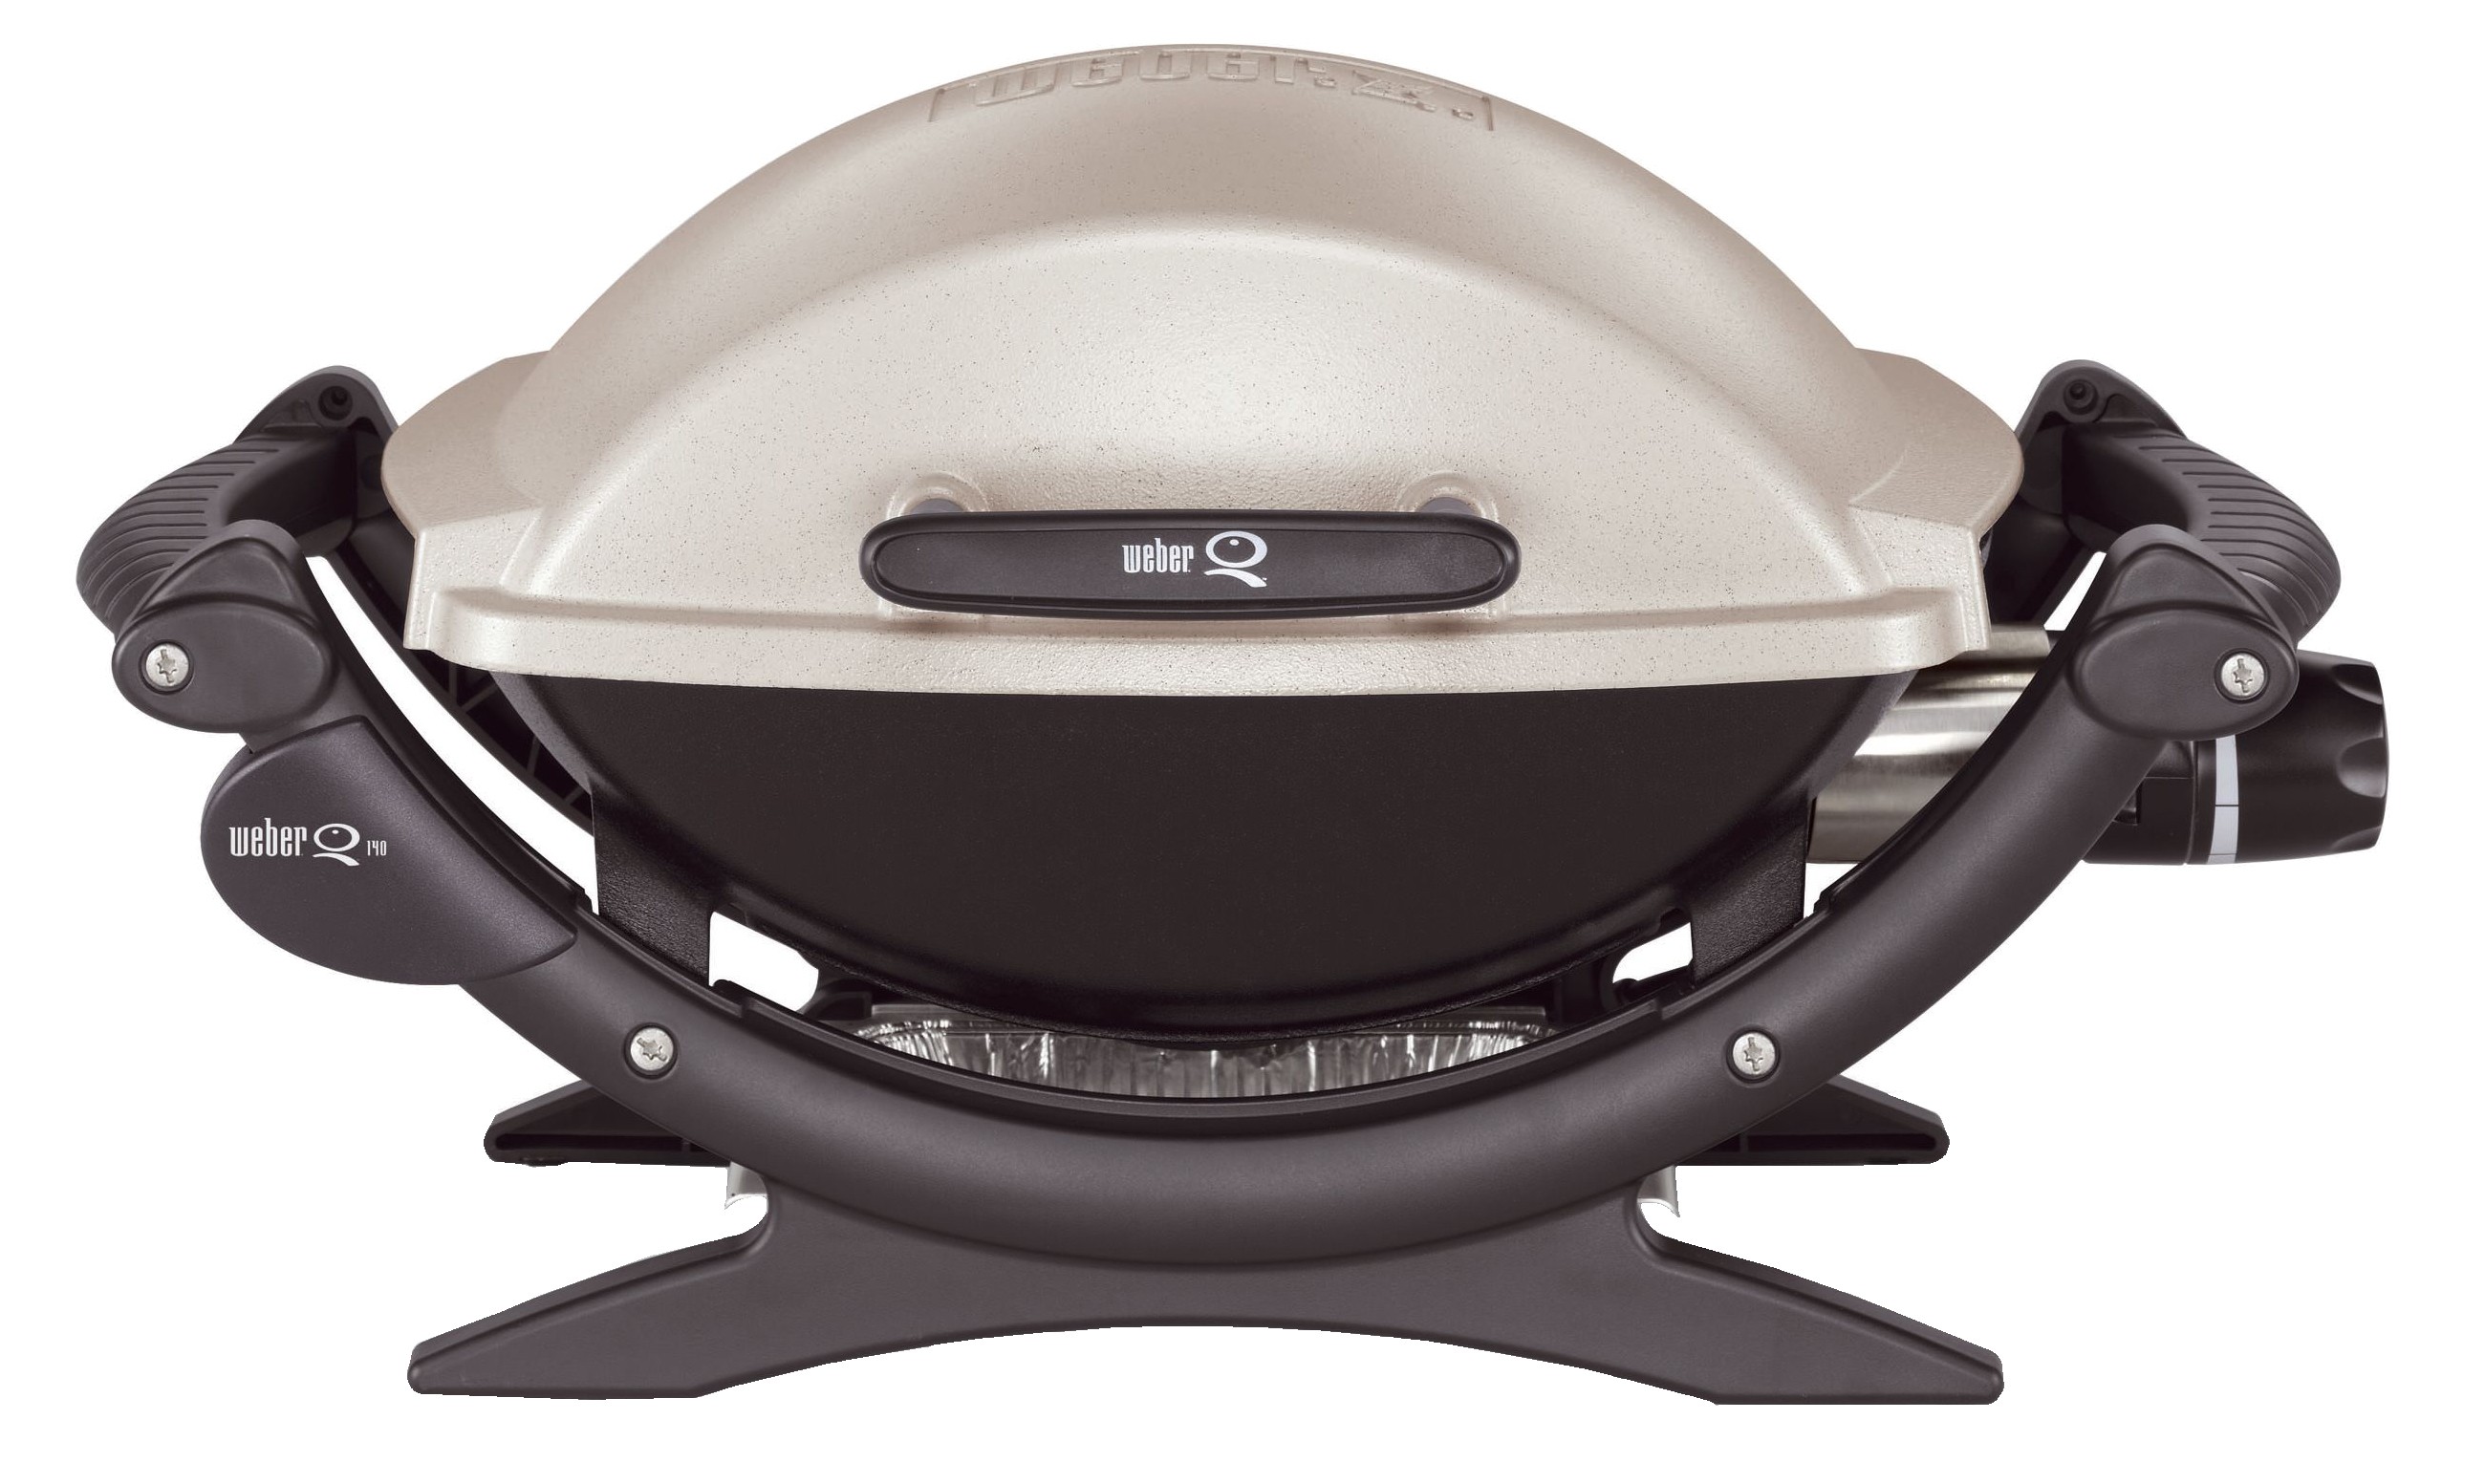 Lefdal grill